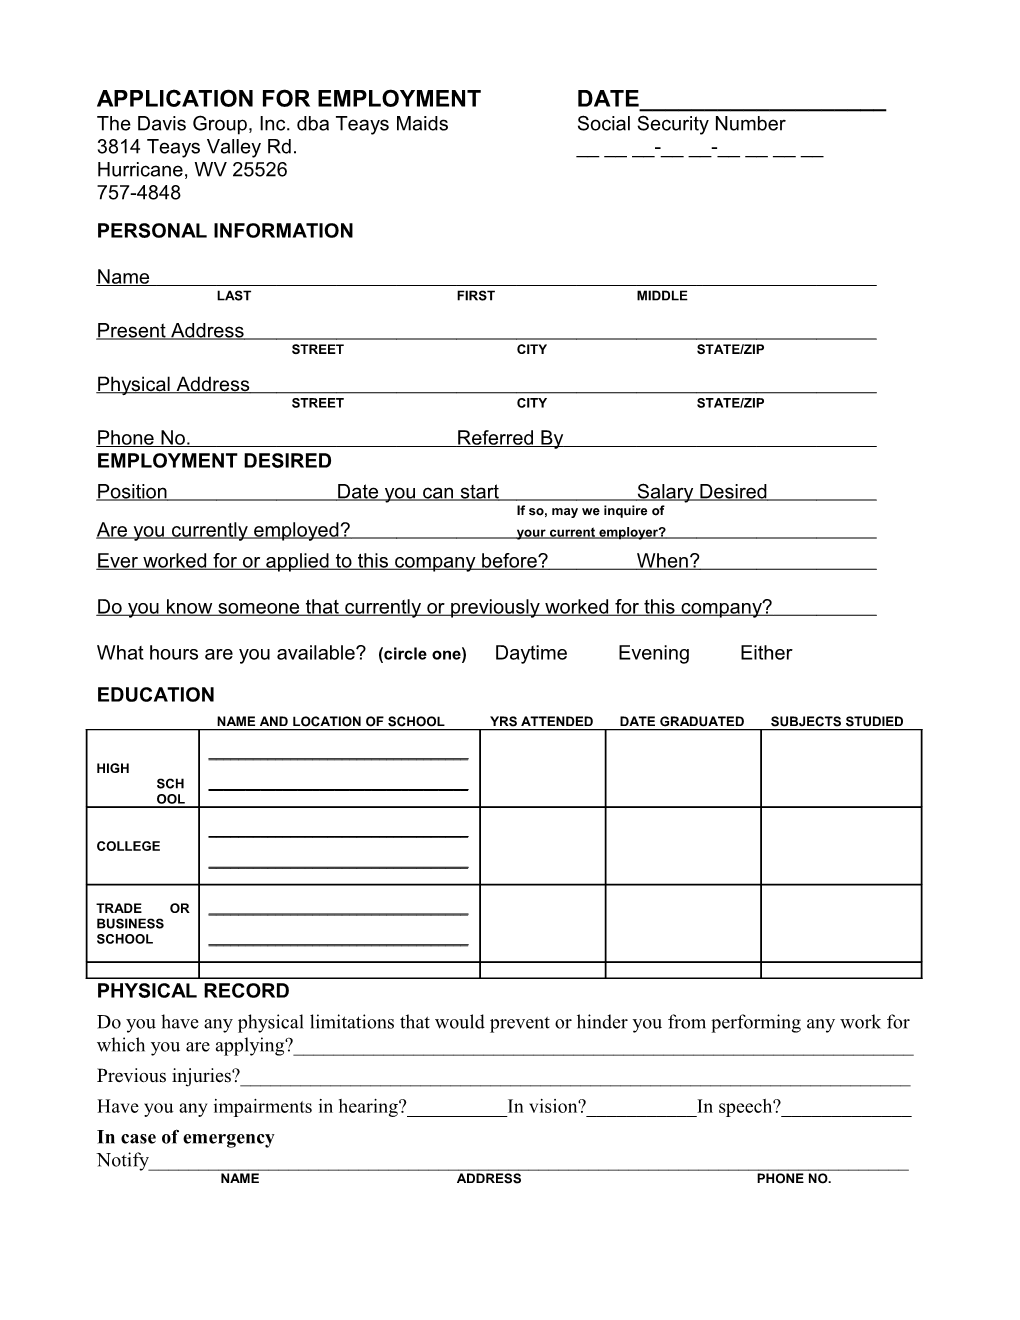 Application for Employment s74